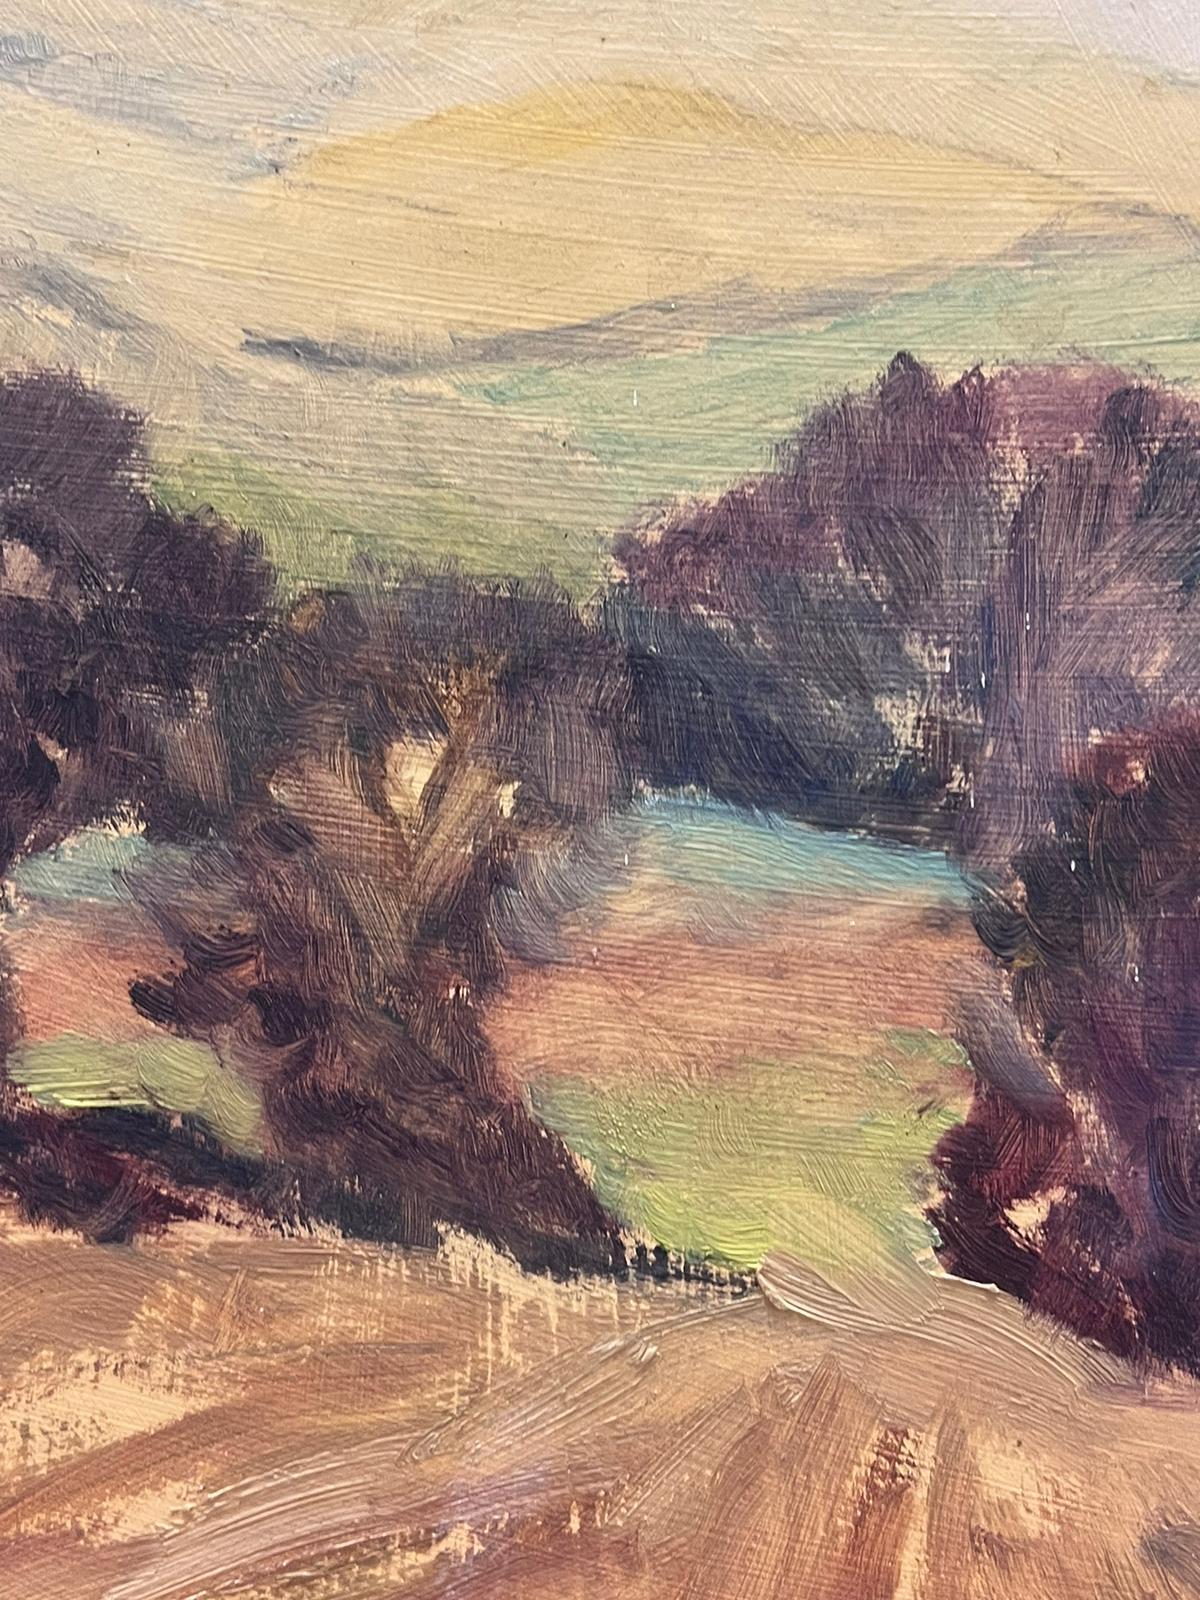 Landscape
signed by Geza Somerset-Paddon (British 20th century)
oil painting on board, unframed
size: 11 x 9 inches
dated 09
condition: overall very good
inscribed verso
provenance: all the paintings we have by this artist have come from their